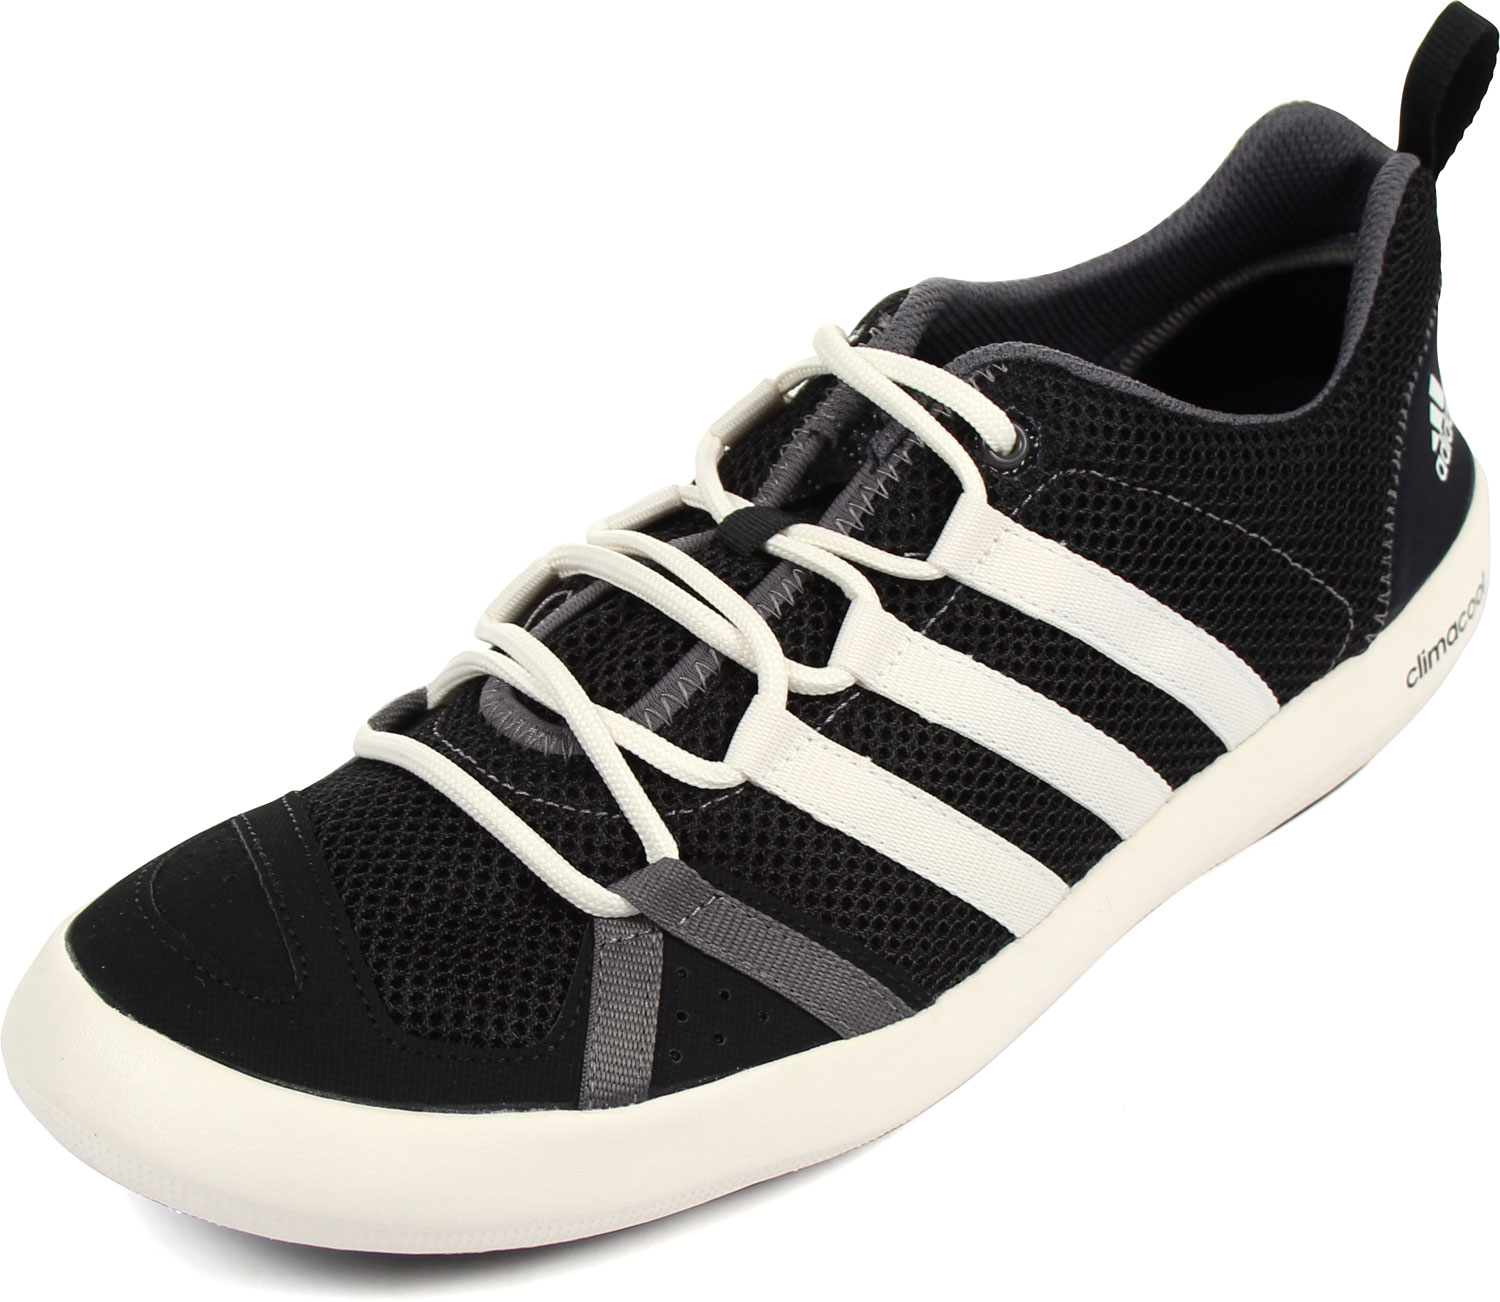 Outlook Maori Skoleuddannelse Adidas - Mens Climacool Boat Lace Water Shoes